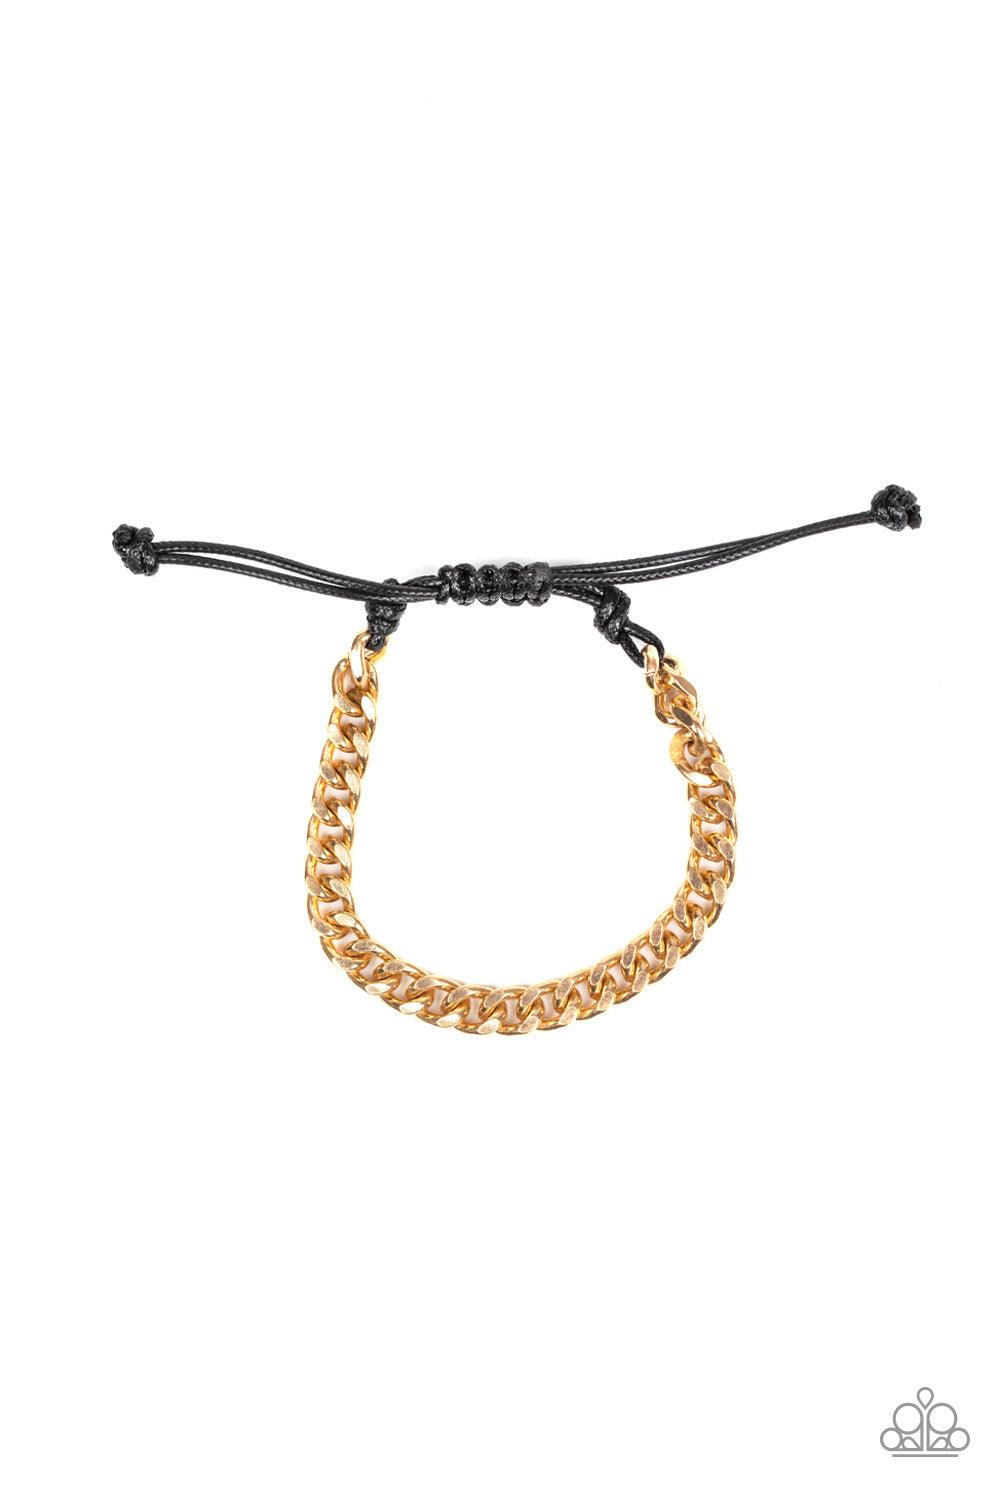 Paparazzi Accessories Rulebreaker - Gold Shiny black cording knots around the ends of an ornate gold beveled cable chain that is wrapped across the top of the wrist for a versatile look. Features an adjustable sliding knot closure. Jewelry